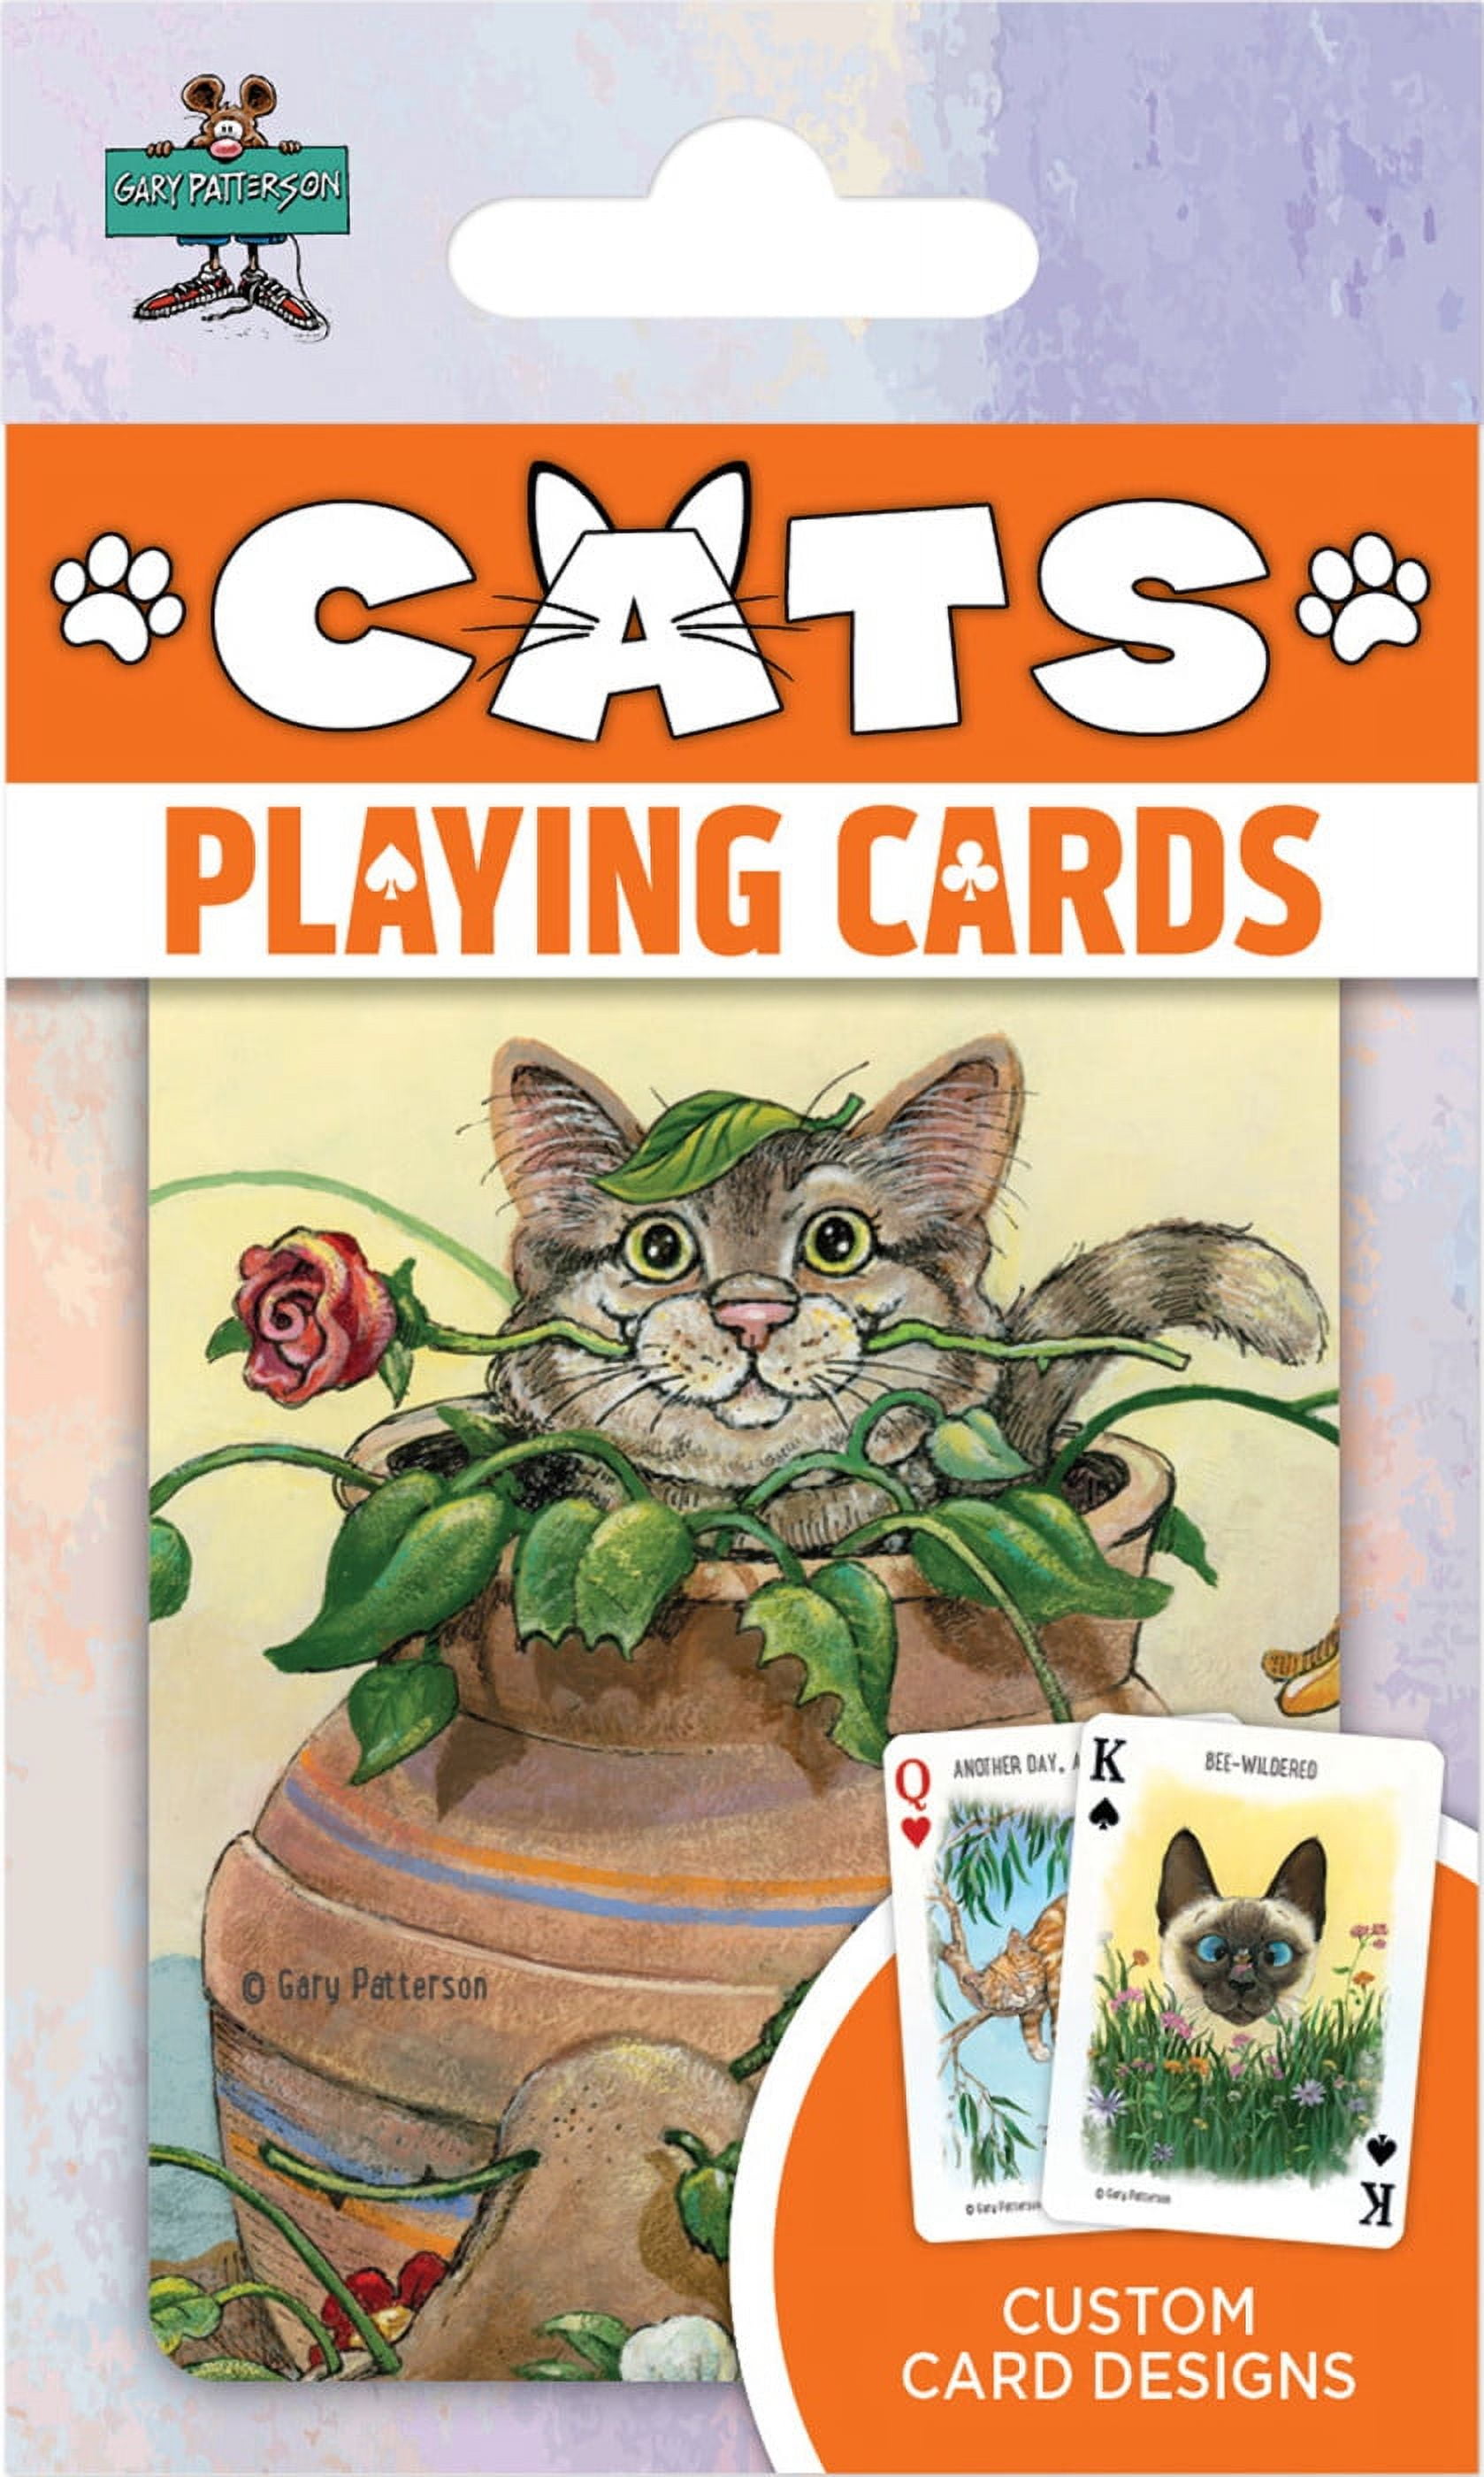 Exploding Kittens Barking Kittens Card Game, Third Expansion of Card Game  at Tractor Supply Co.